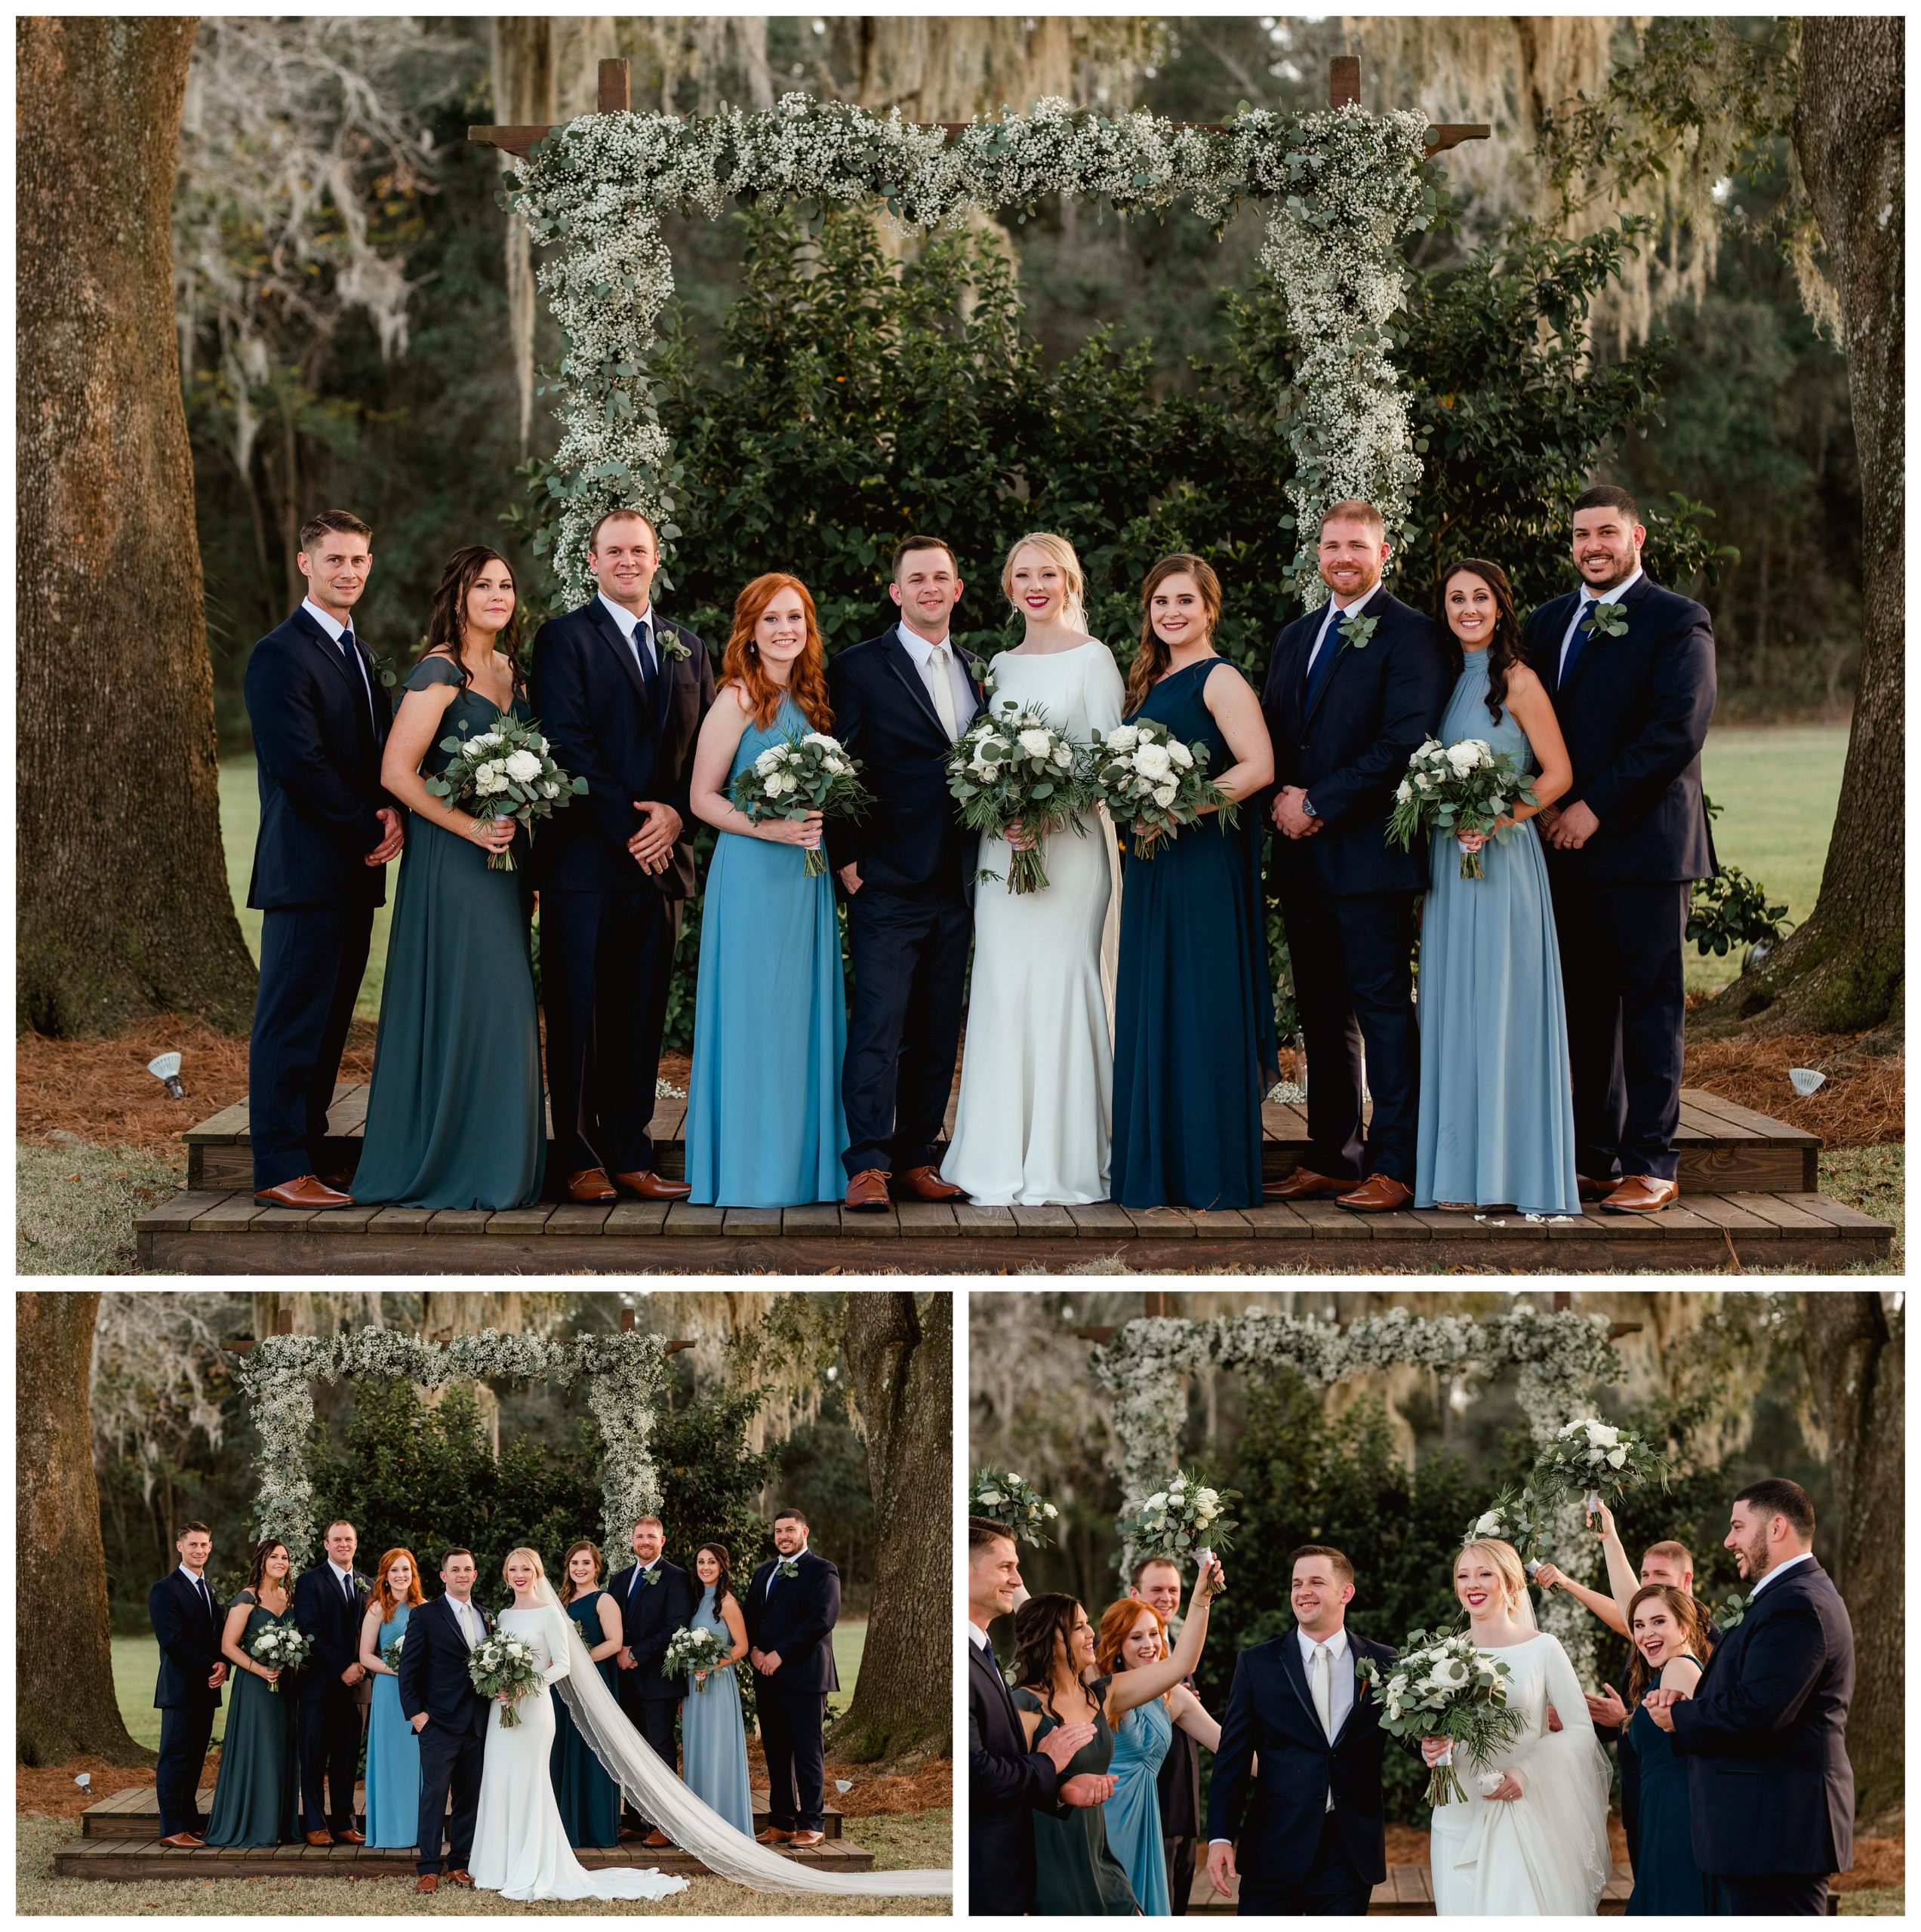 Fun bridal party photos at the alter - Shelly Williams Photography